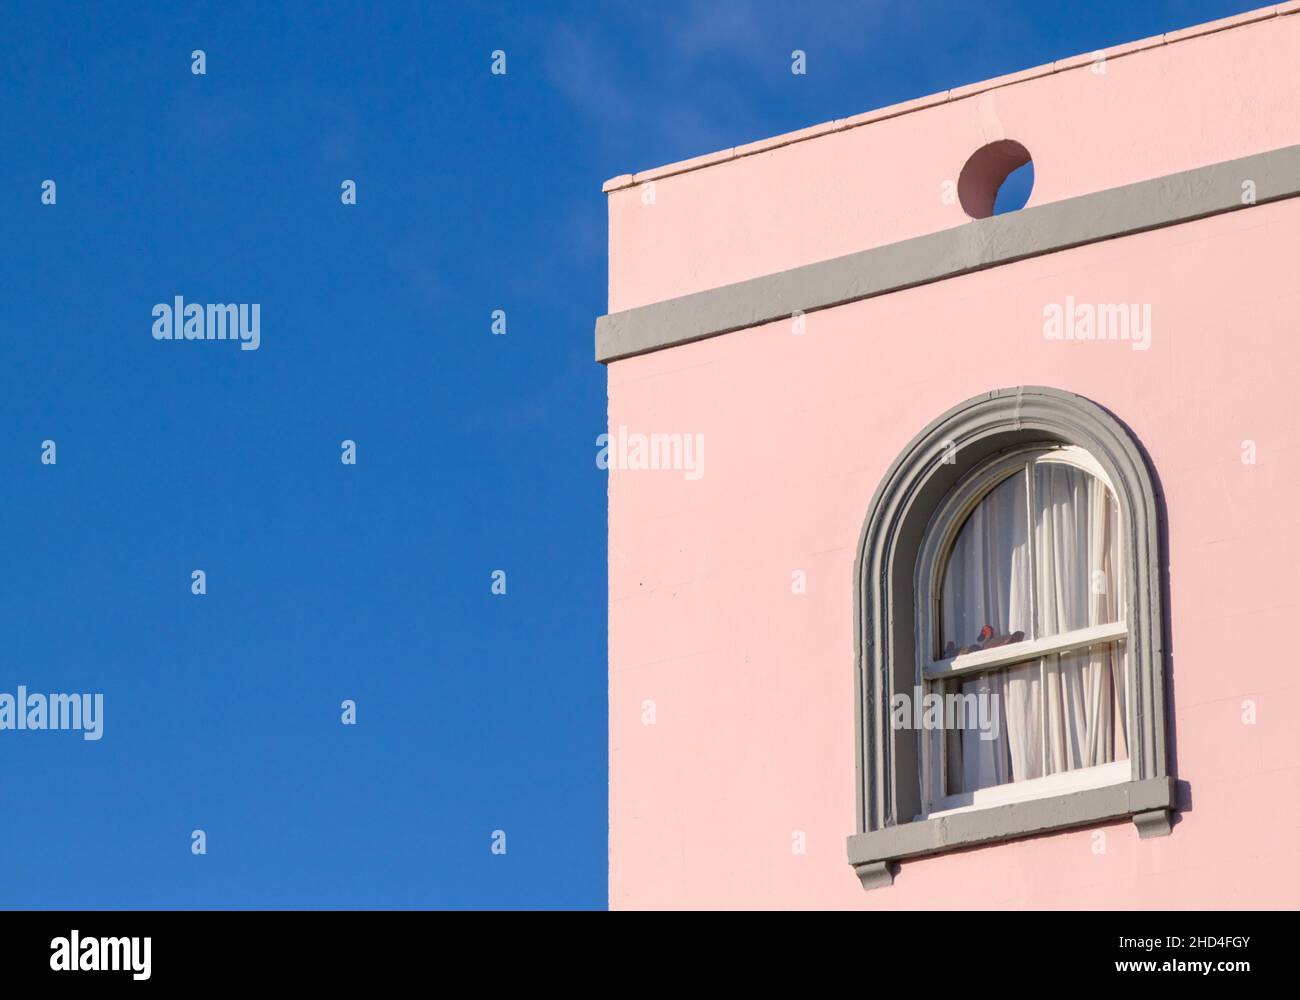 Grey Round Arch Window In A Pink Painted Building Against A Blue Sky, Christchurch UK Stock Photo